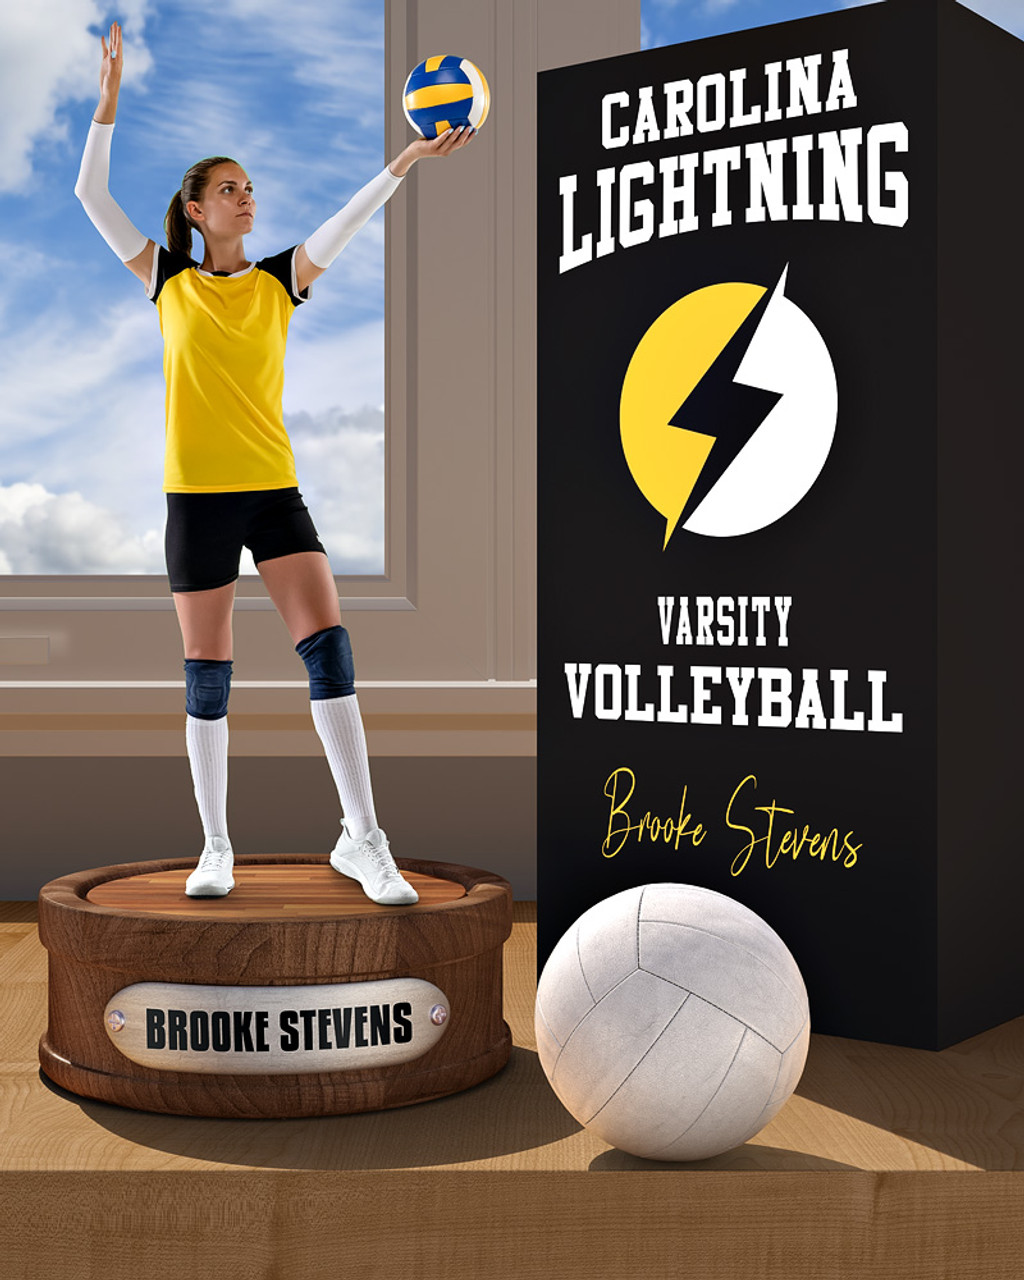 SPORTS POSTER PHOTO TEMPLATE - VOLLEYBALL DISPLAY - LAYERED PHOTOSHOP SPORTS TEMPLATE